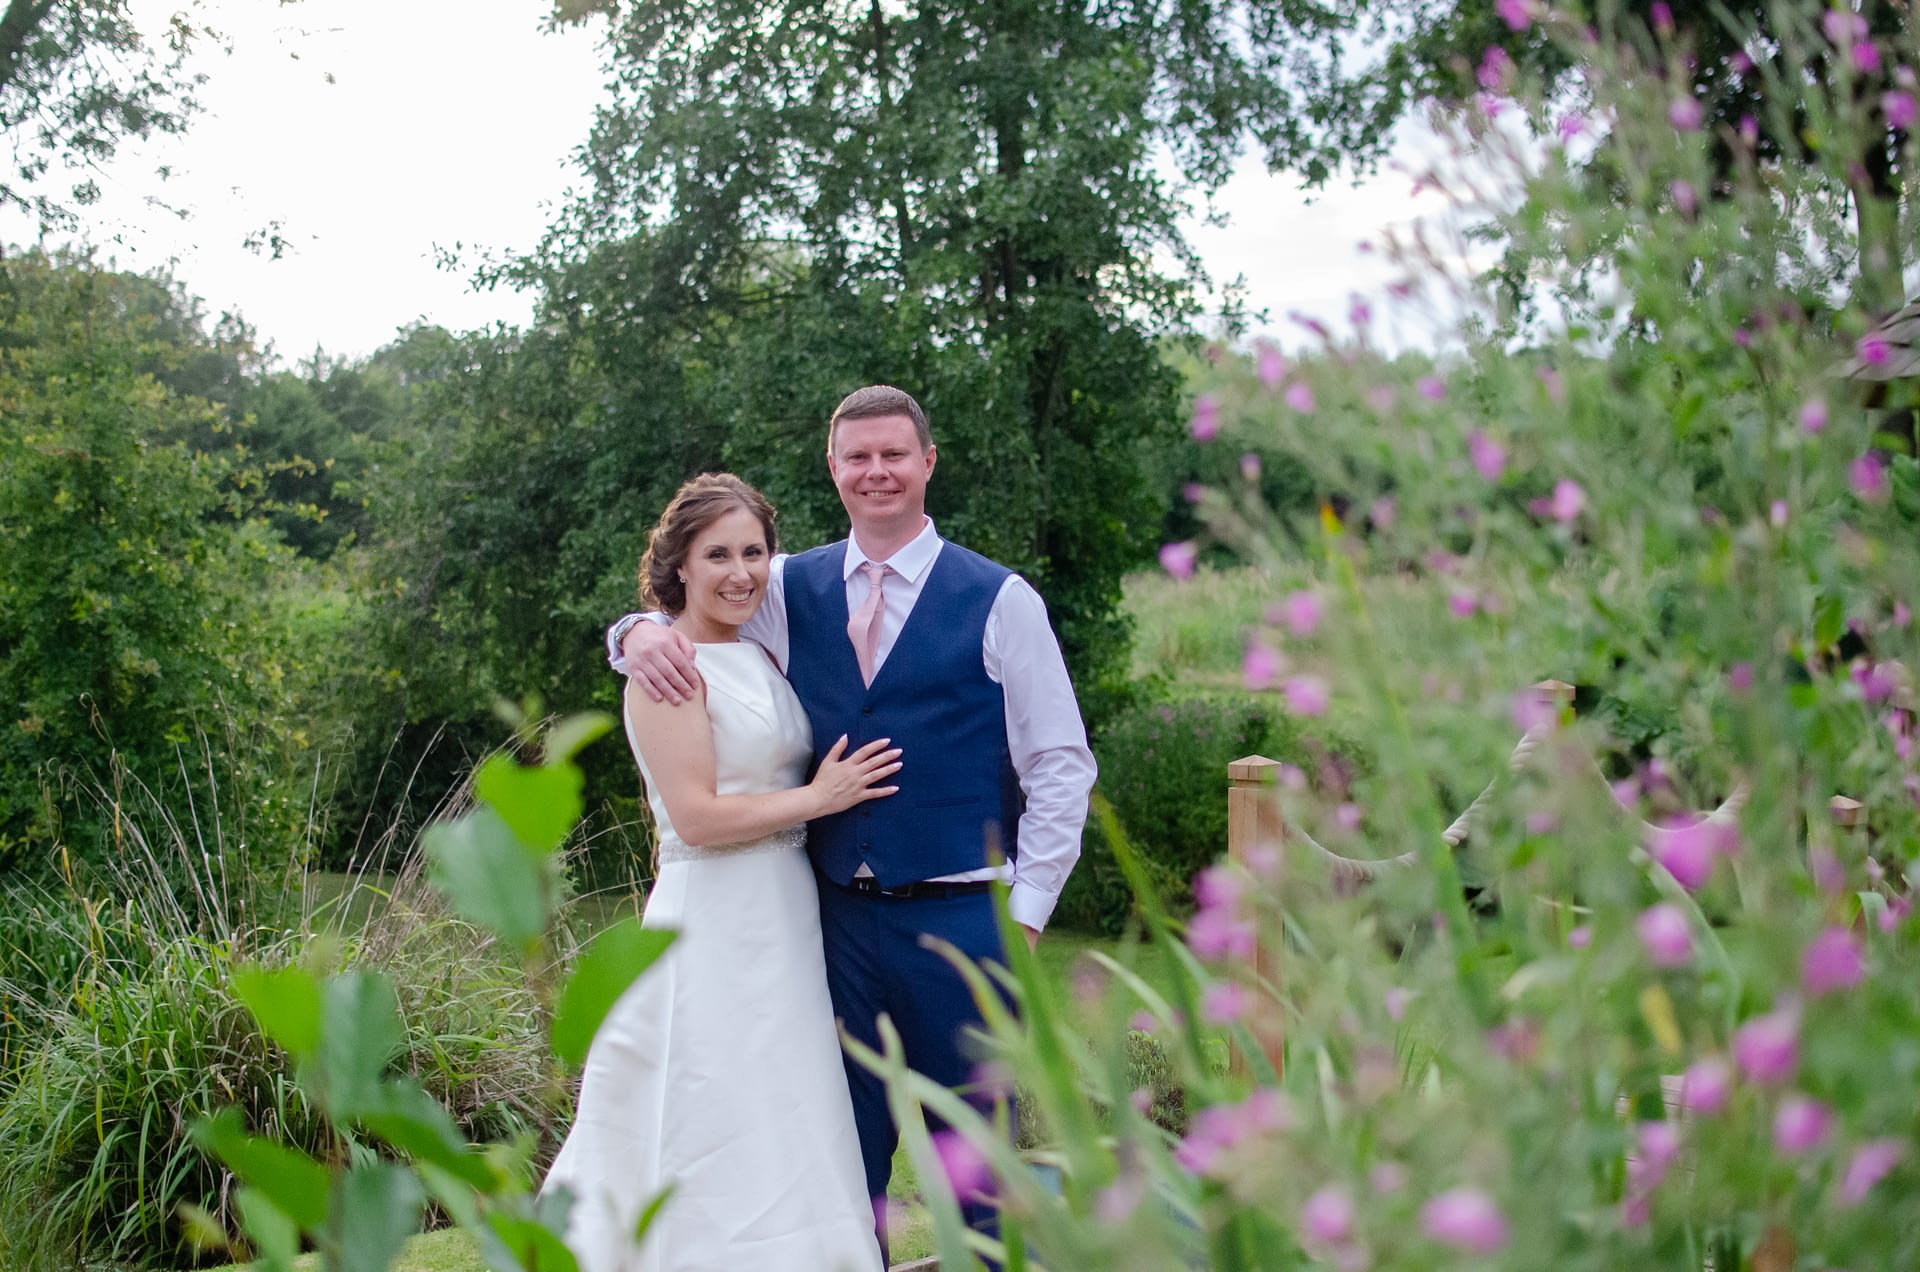 Summer Wedding at Coltsford Mill, Oxted